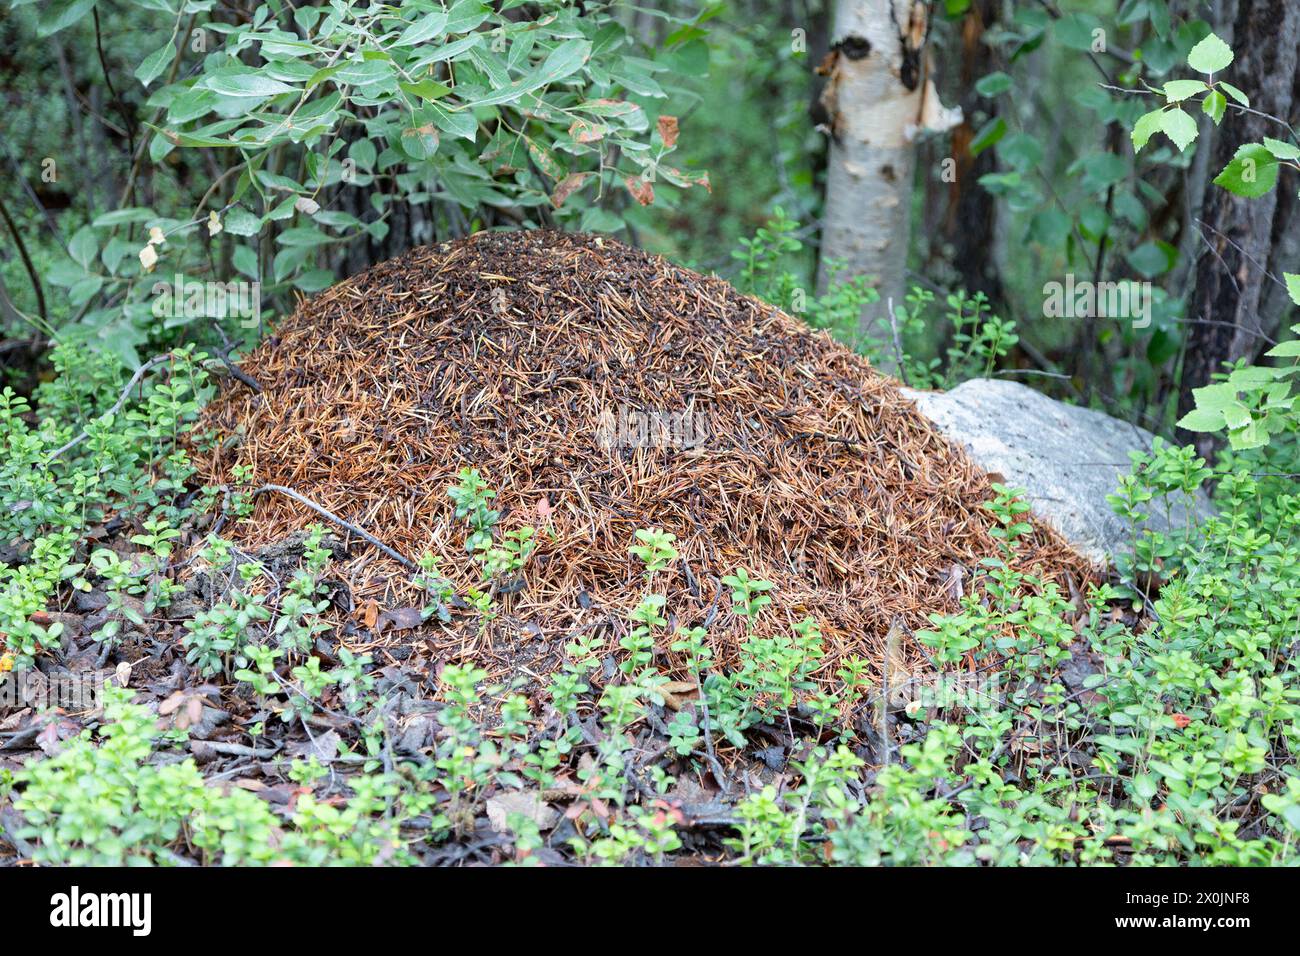 Big anthill in the summer forest close up Stock Photo